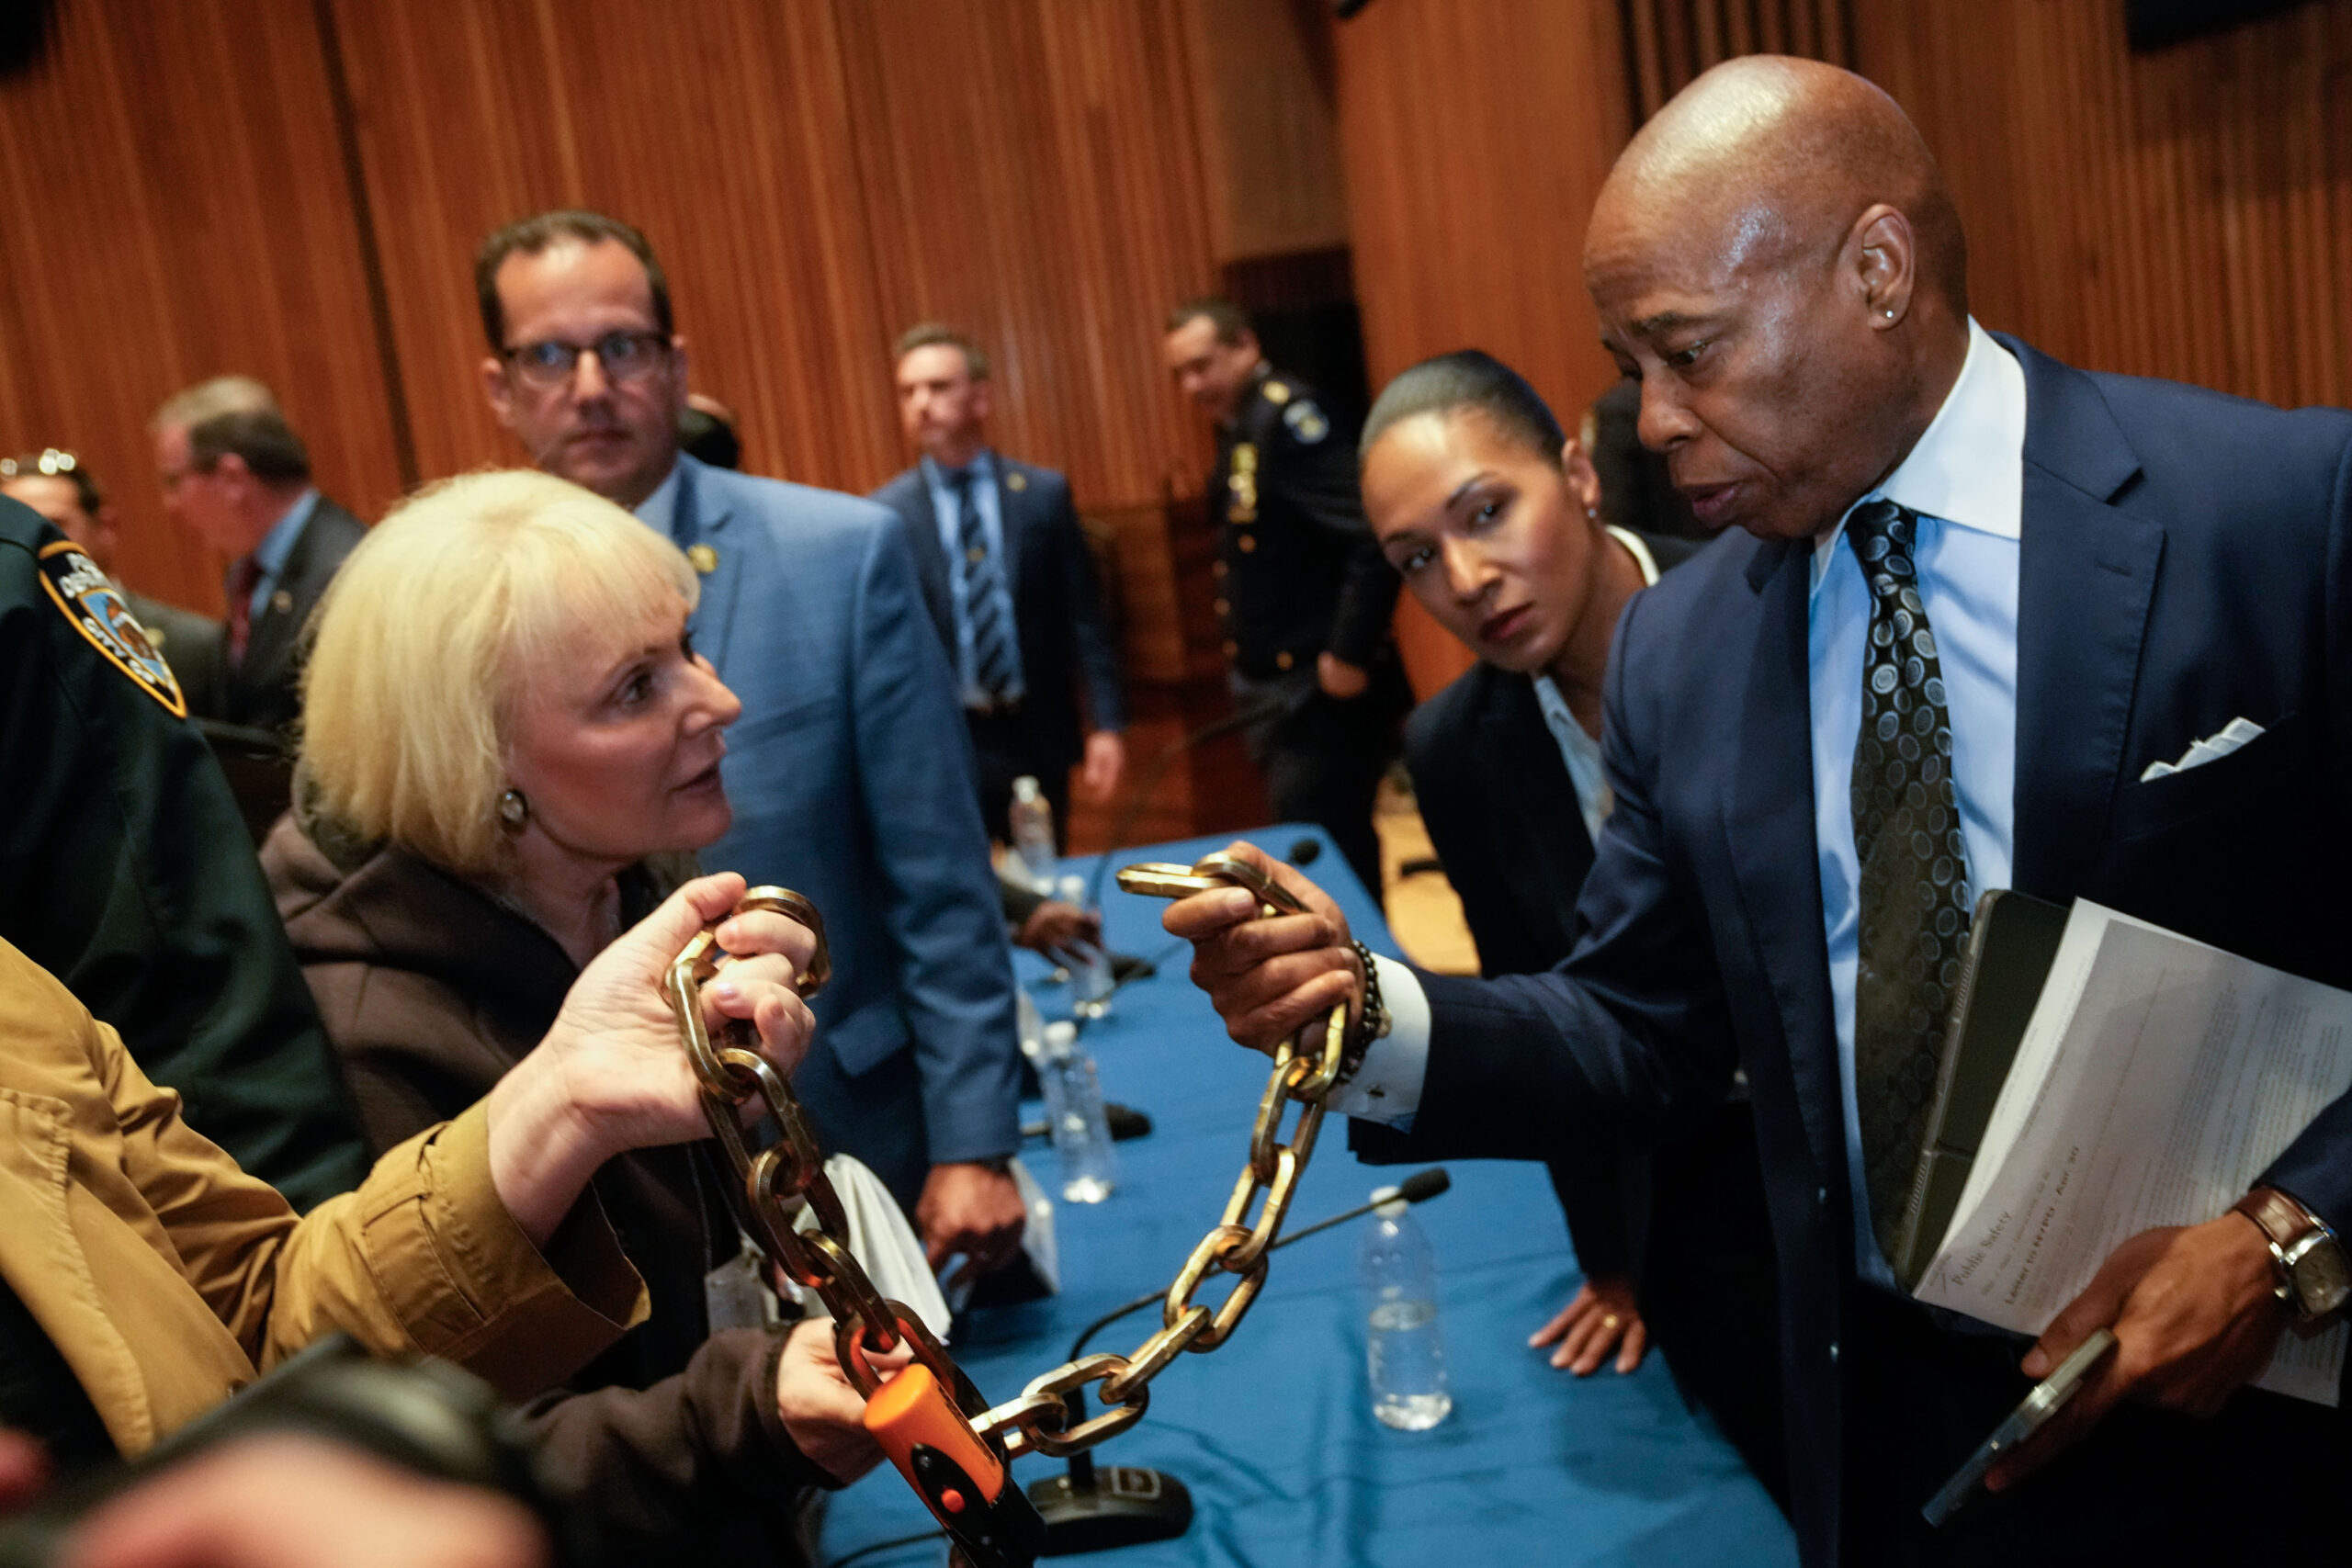 Mayor Eric Adams showed reporters this morning a chain used to barricade a door during college protests in New York City.